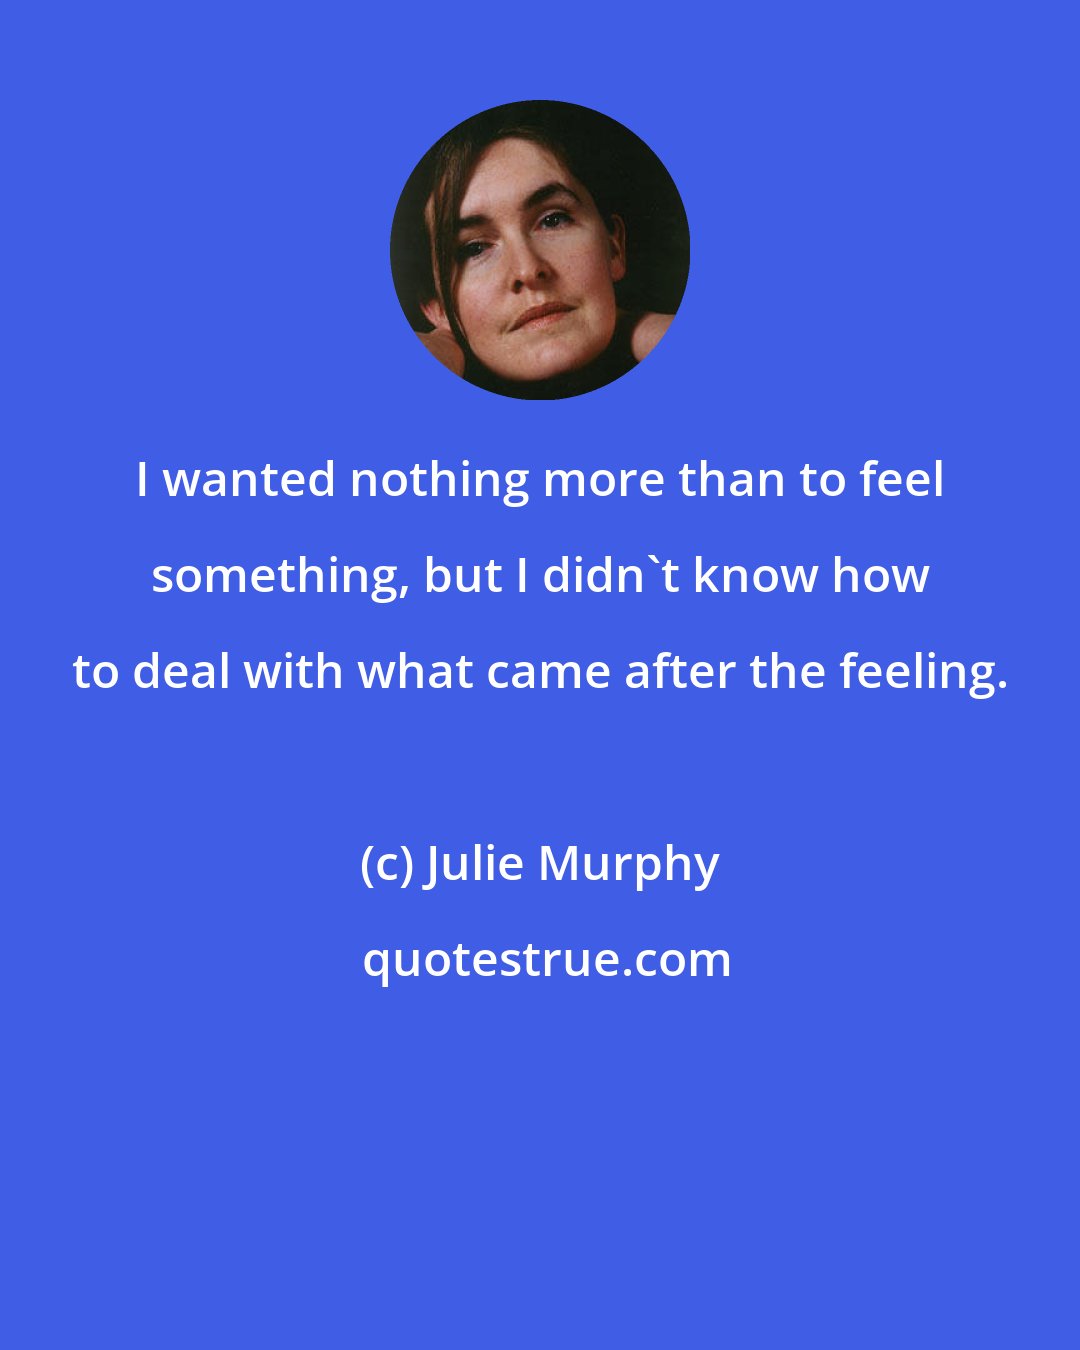 Julie Murphy: I wanted nothing more than to feel something, but I didn't know how to deal with what came after the feeling.